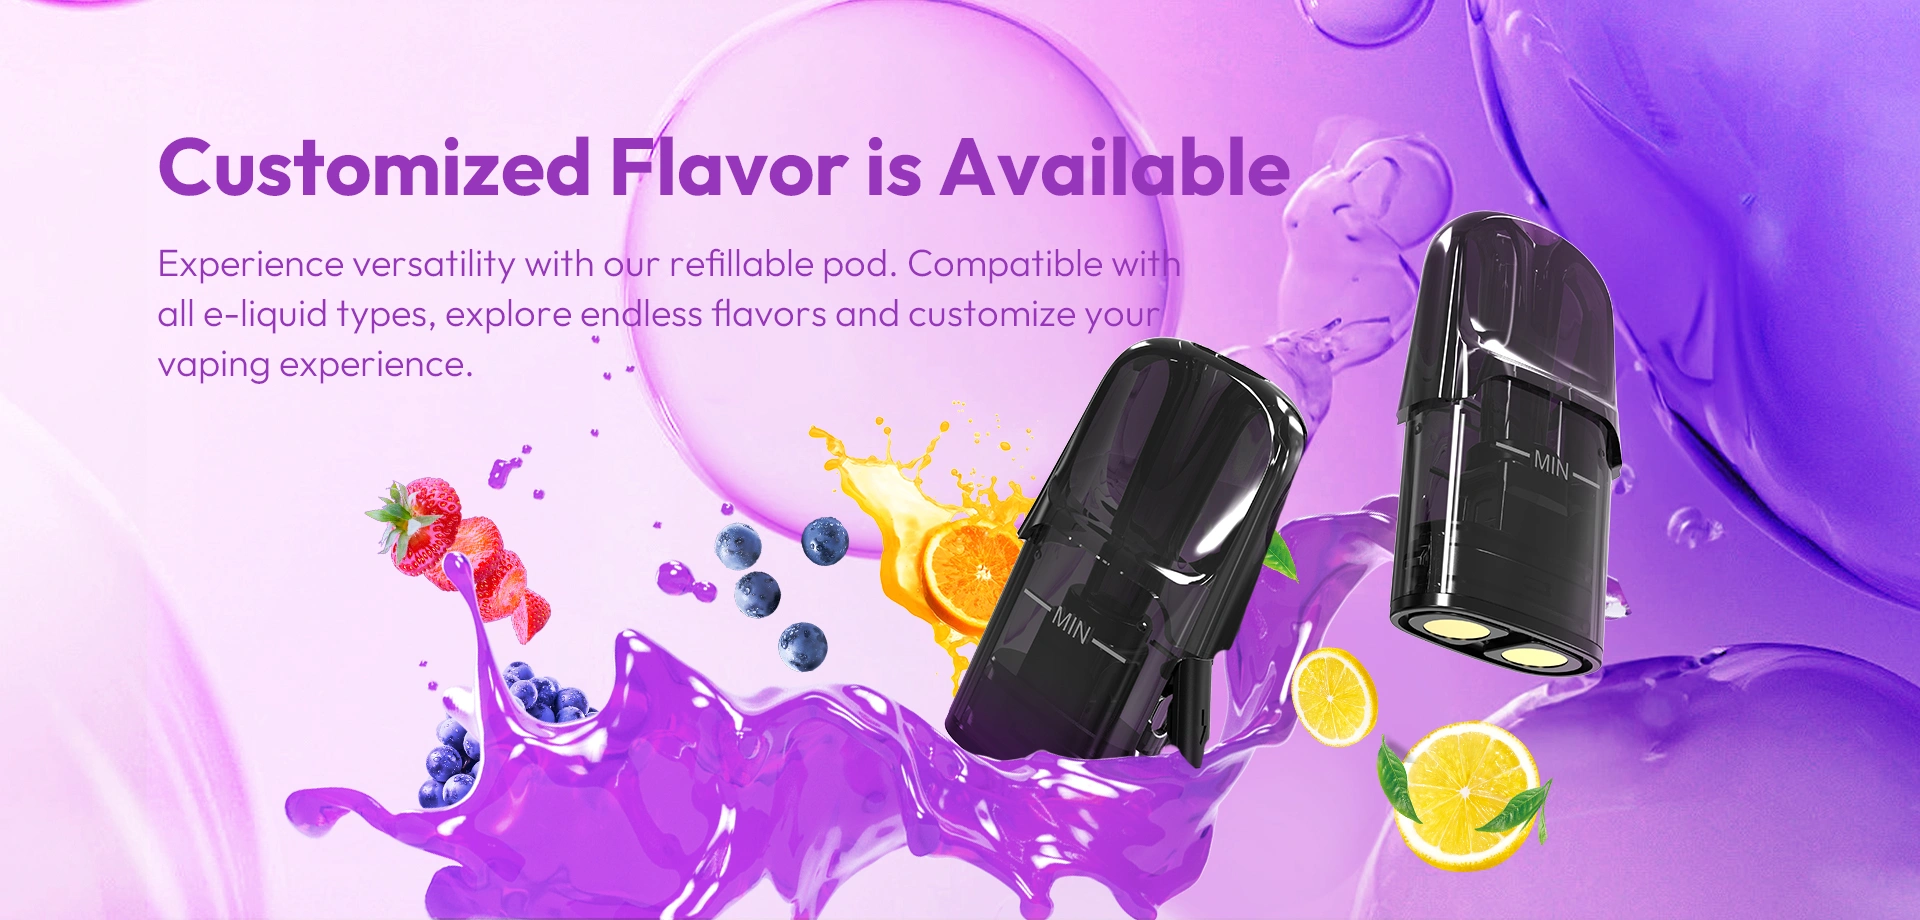 Customized Flavor is Available Experience versatility with our refillable pod. Compatible with all e-liquid types, explore endless flavors and tailor your vaping experience.